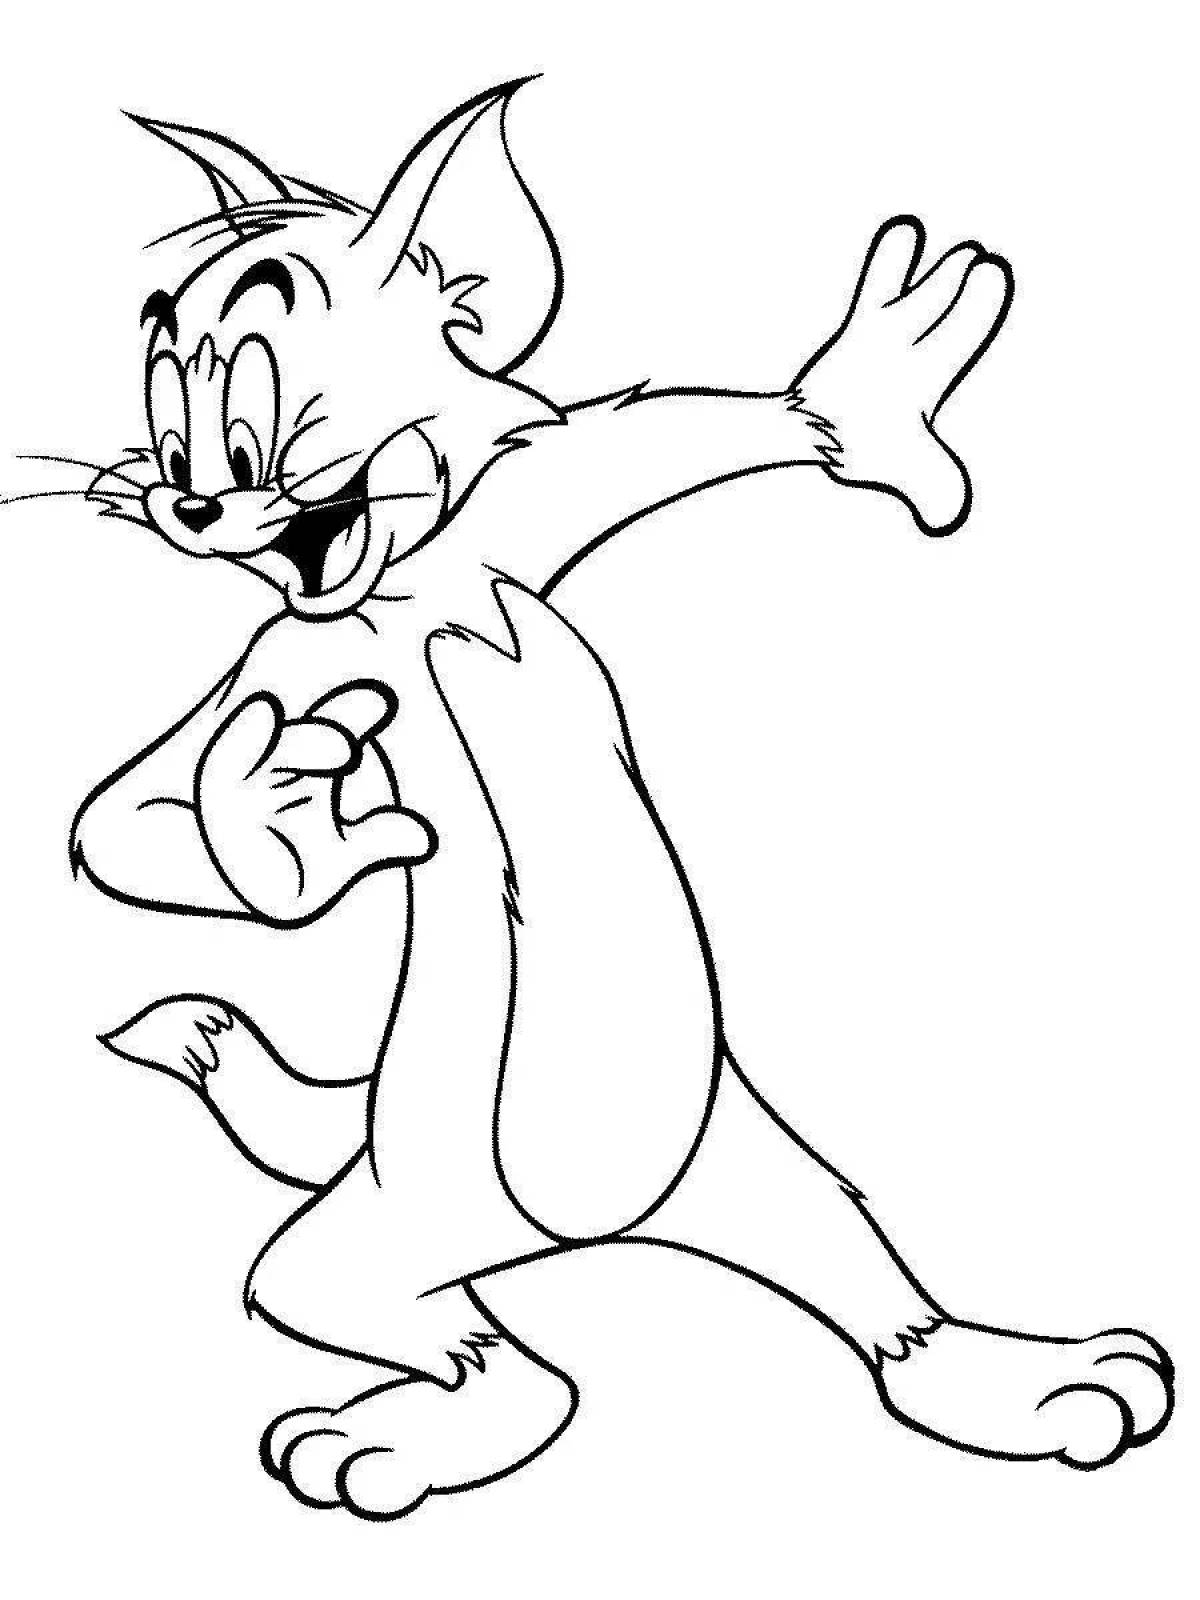 Playful tom and jerry coloring book